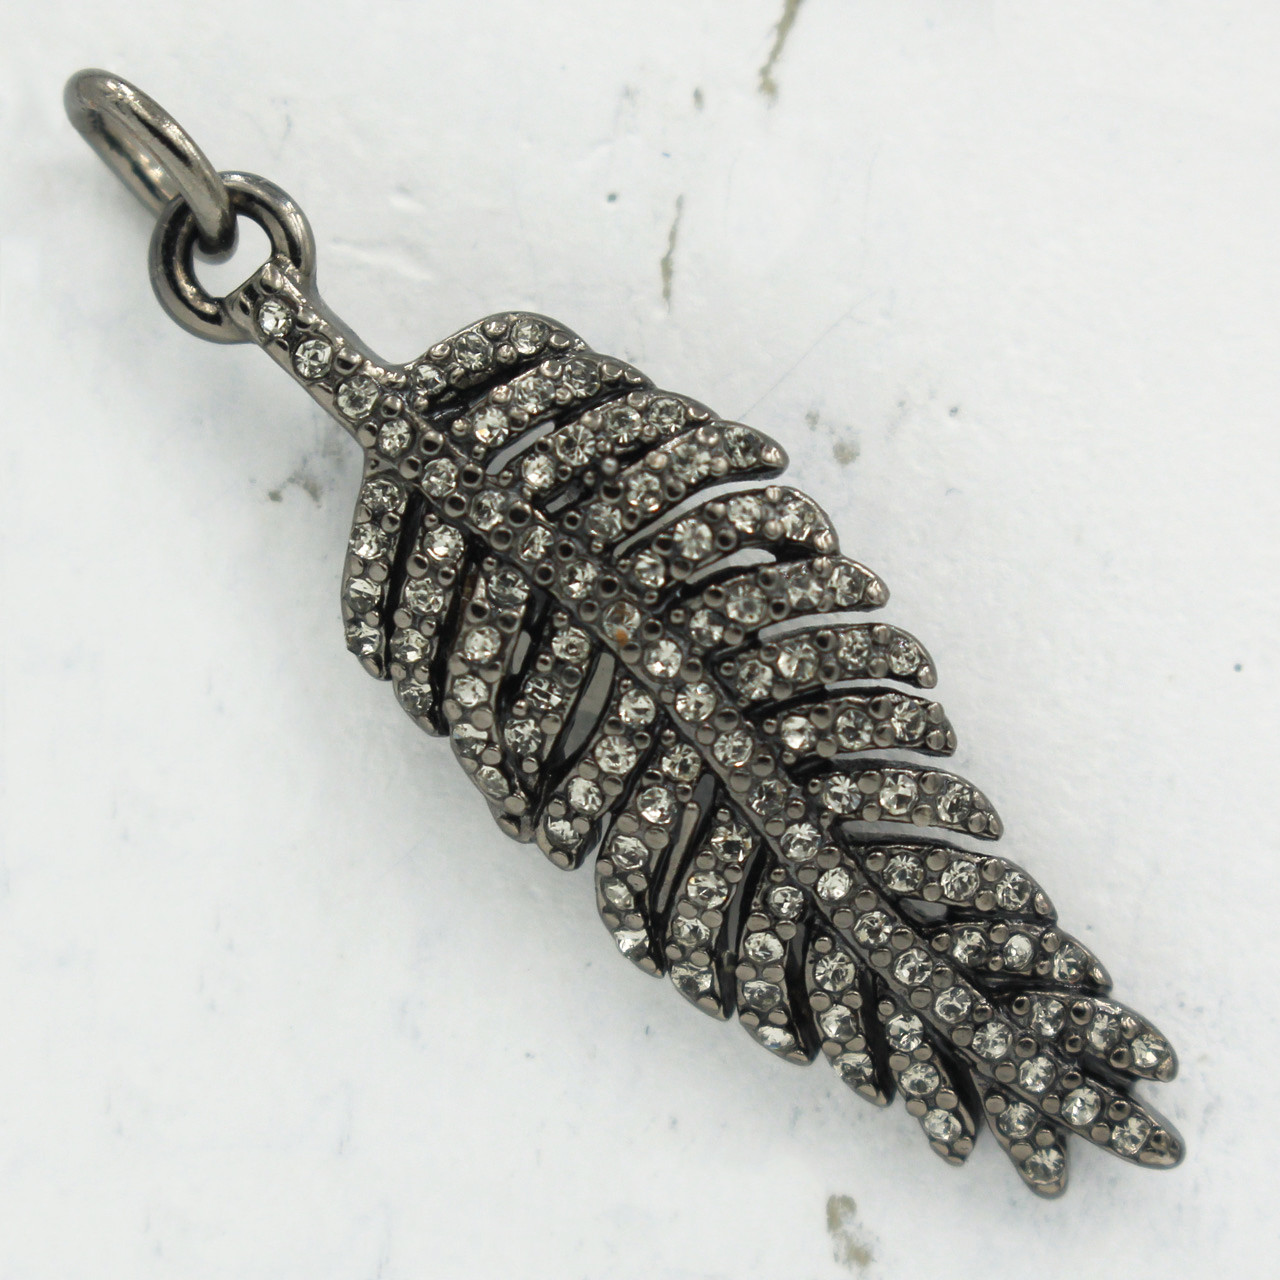 Theseus Goneryl Lav aftensmad Pave Feather Charm - Pendant | Black Diamond Crystal| Perfect for Necklaces  or Bracelets | Wildflower + Co.